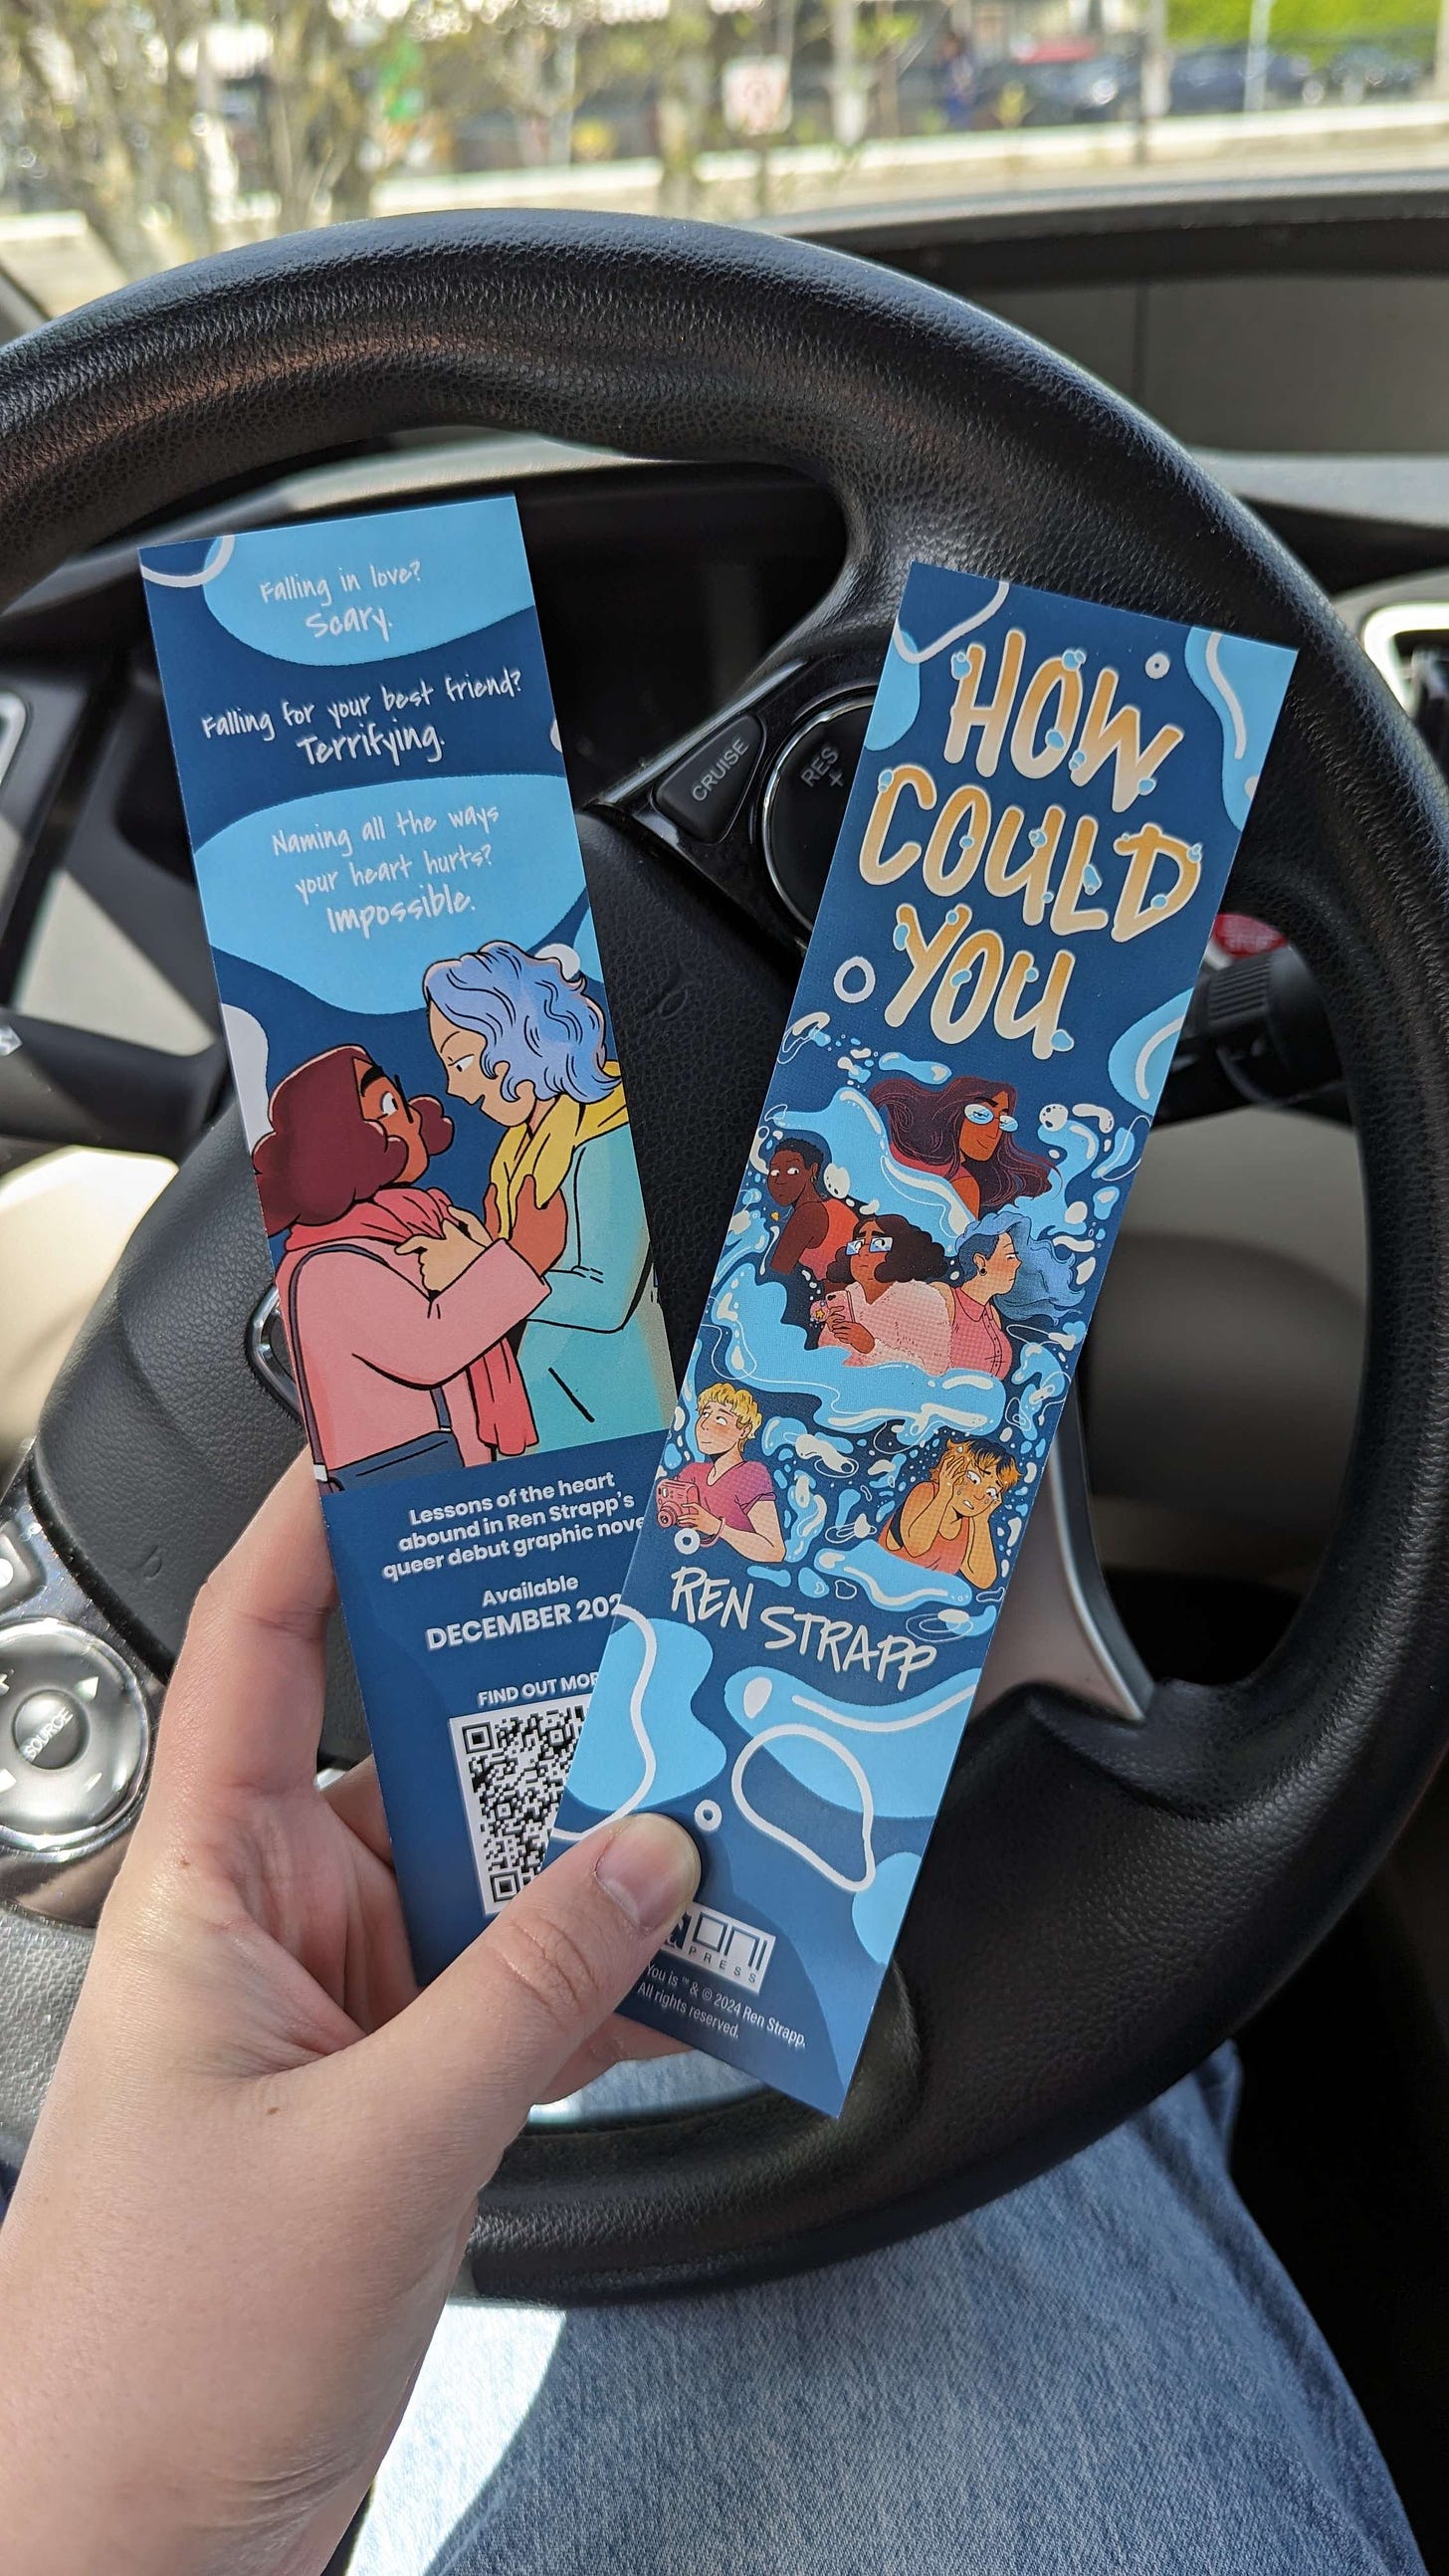 Photograph of two blue bookmarks (front and back) promoting How Could You